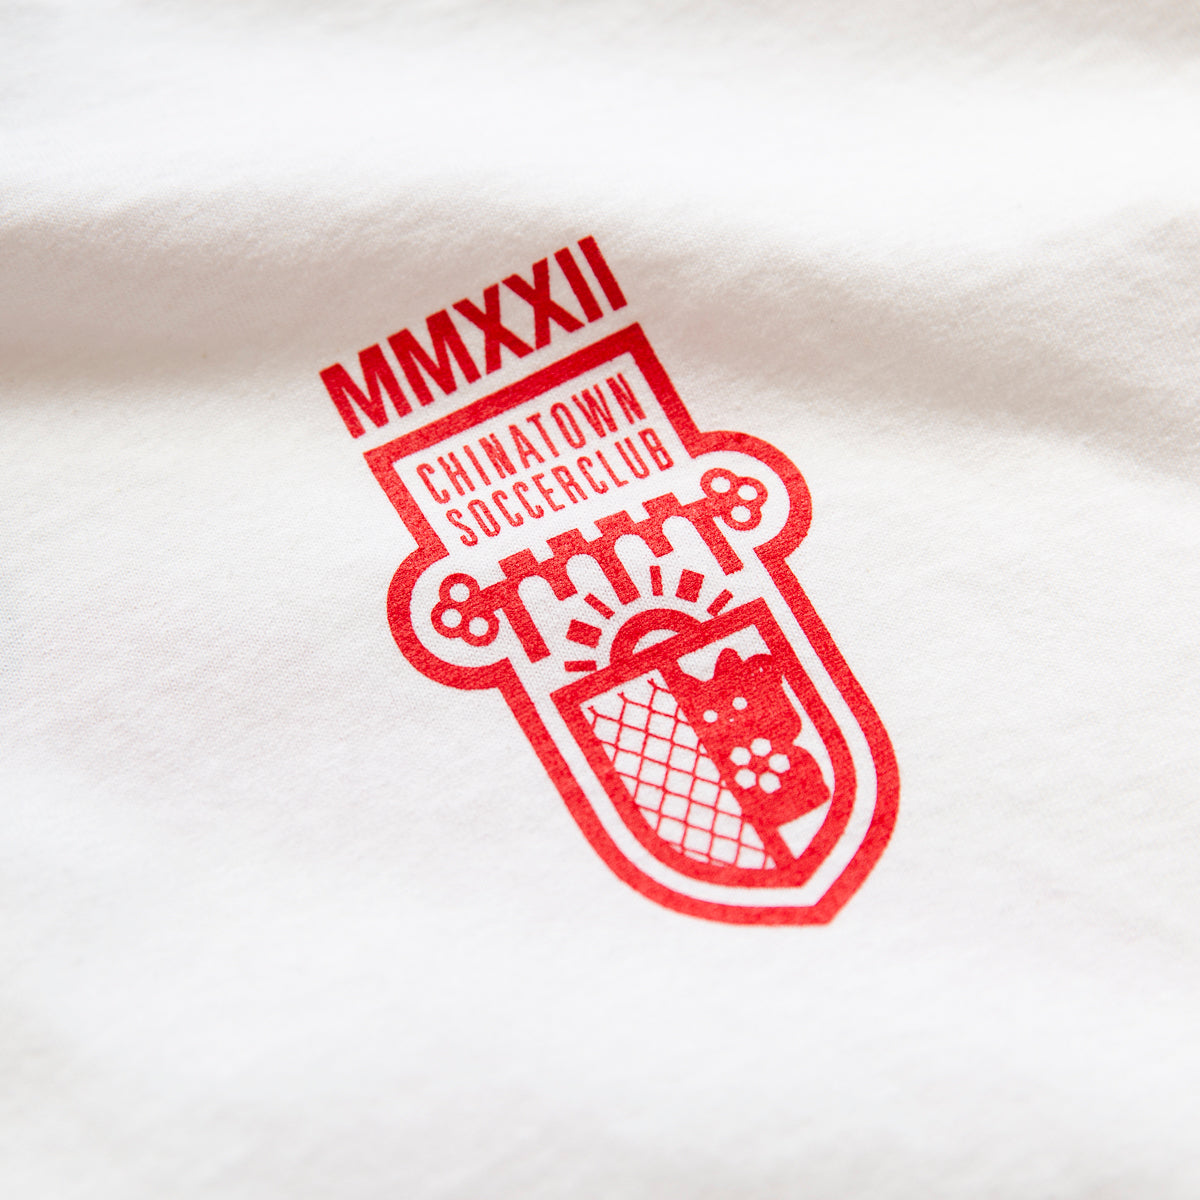 Load image into Gallery viewer, Chrystie x CSC Anniversary Crest T-shirt - White